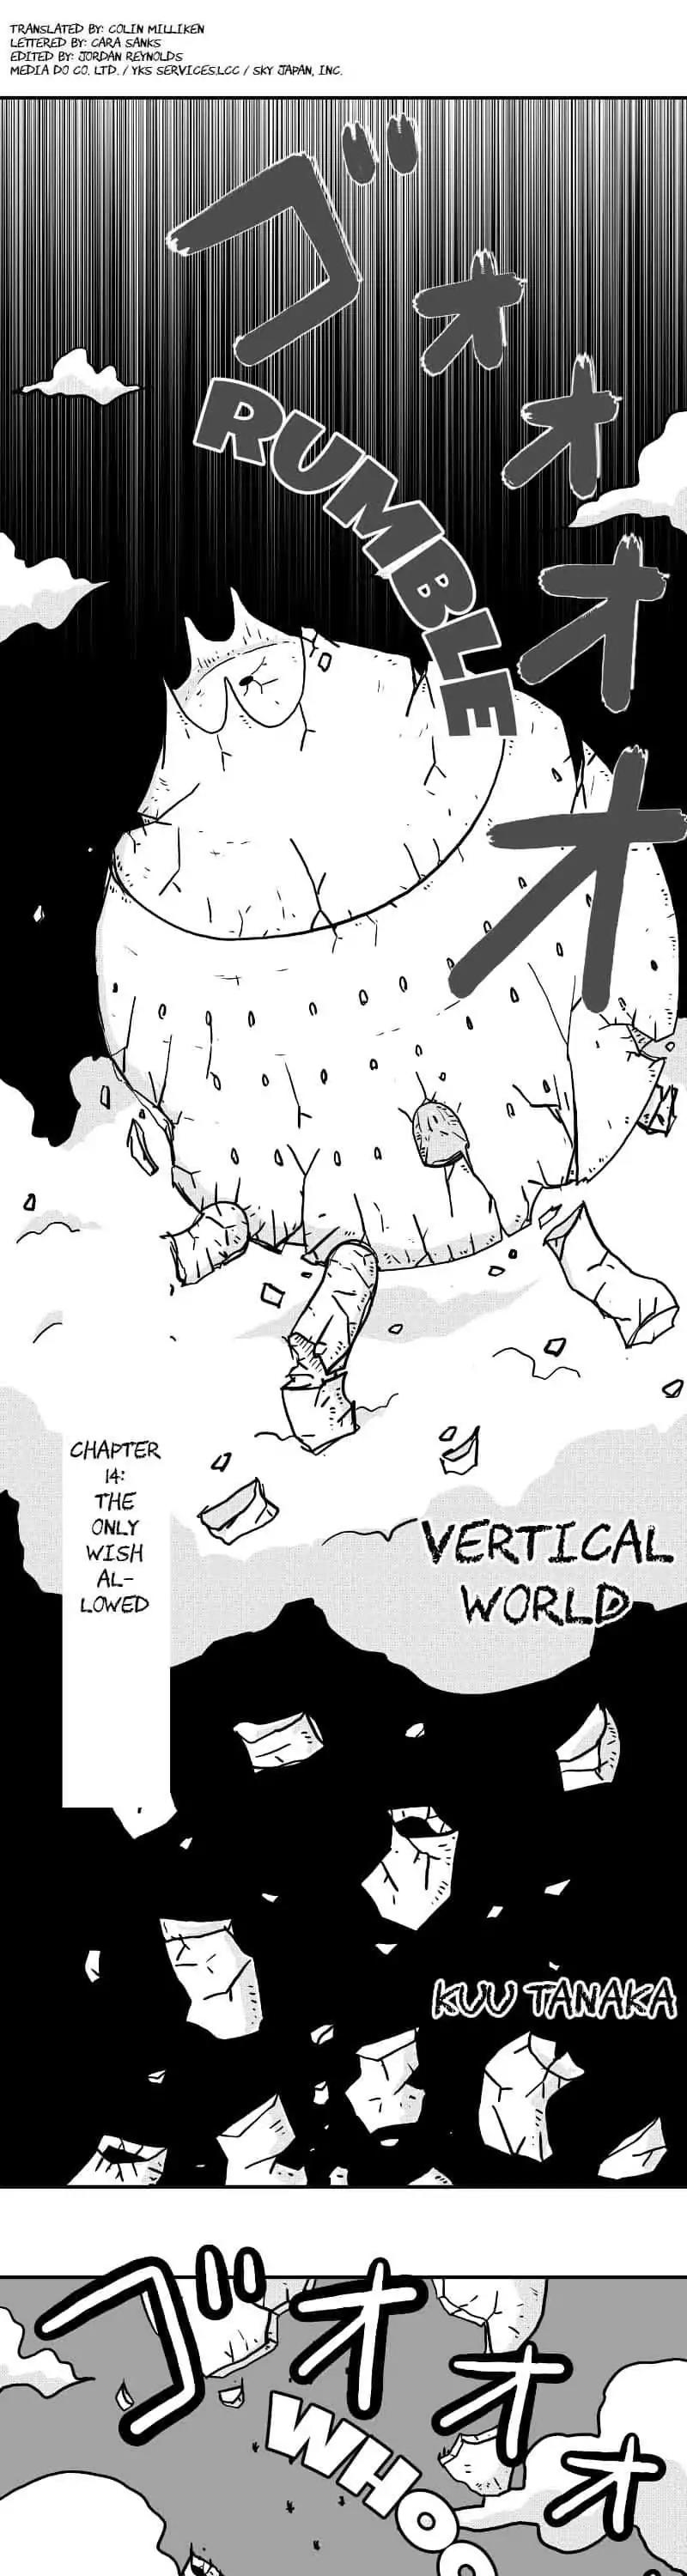 The Vertical World Chapter 14: